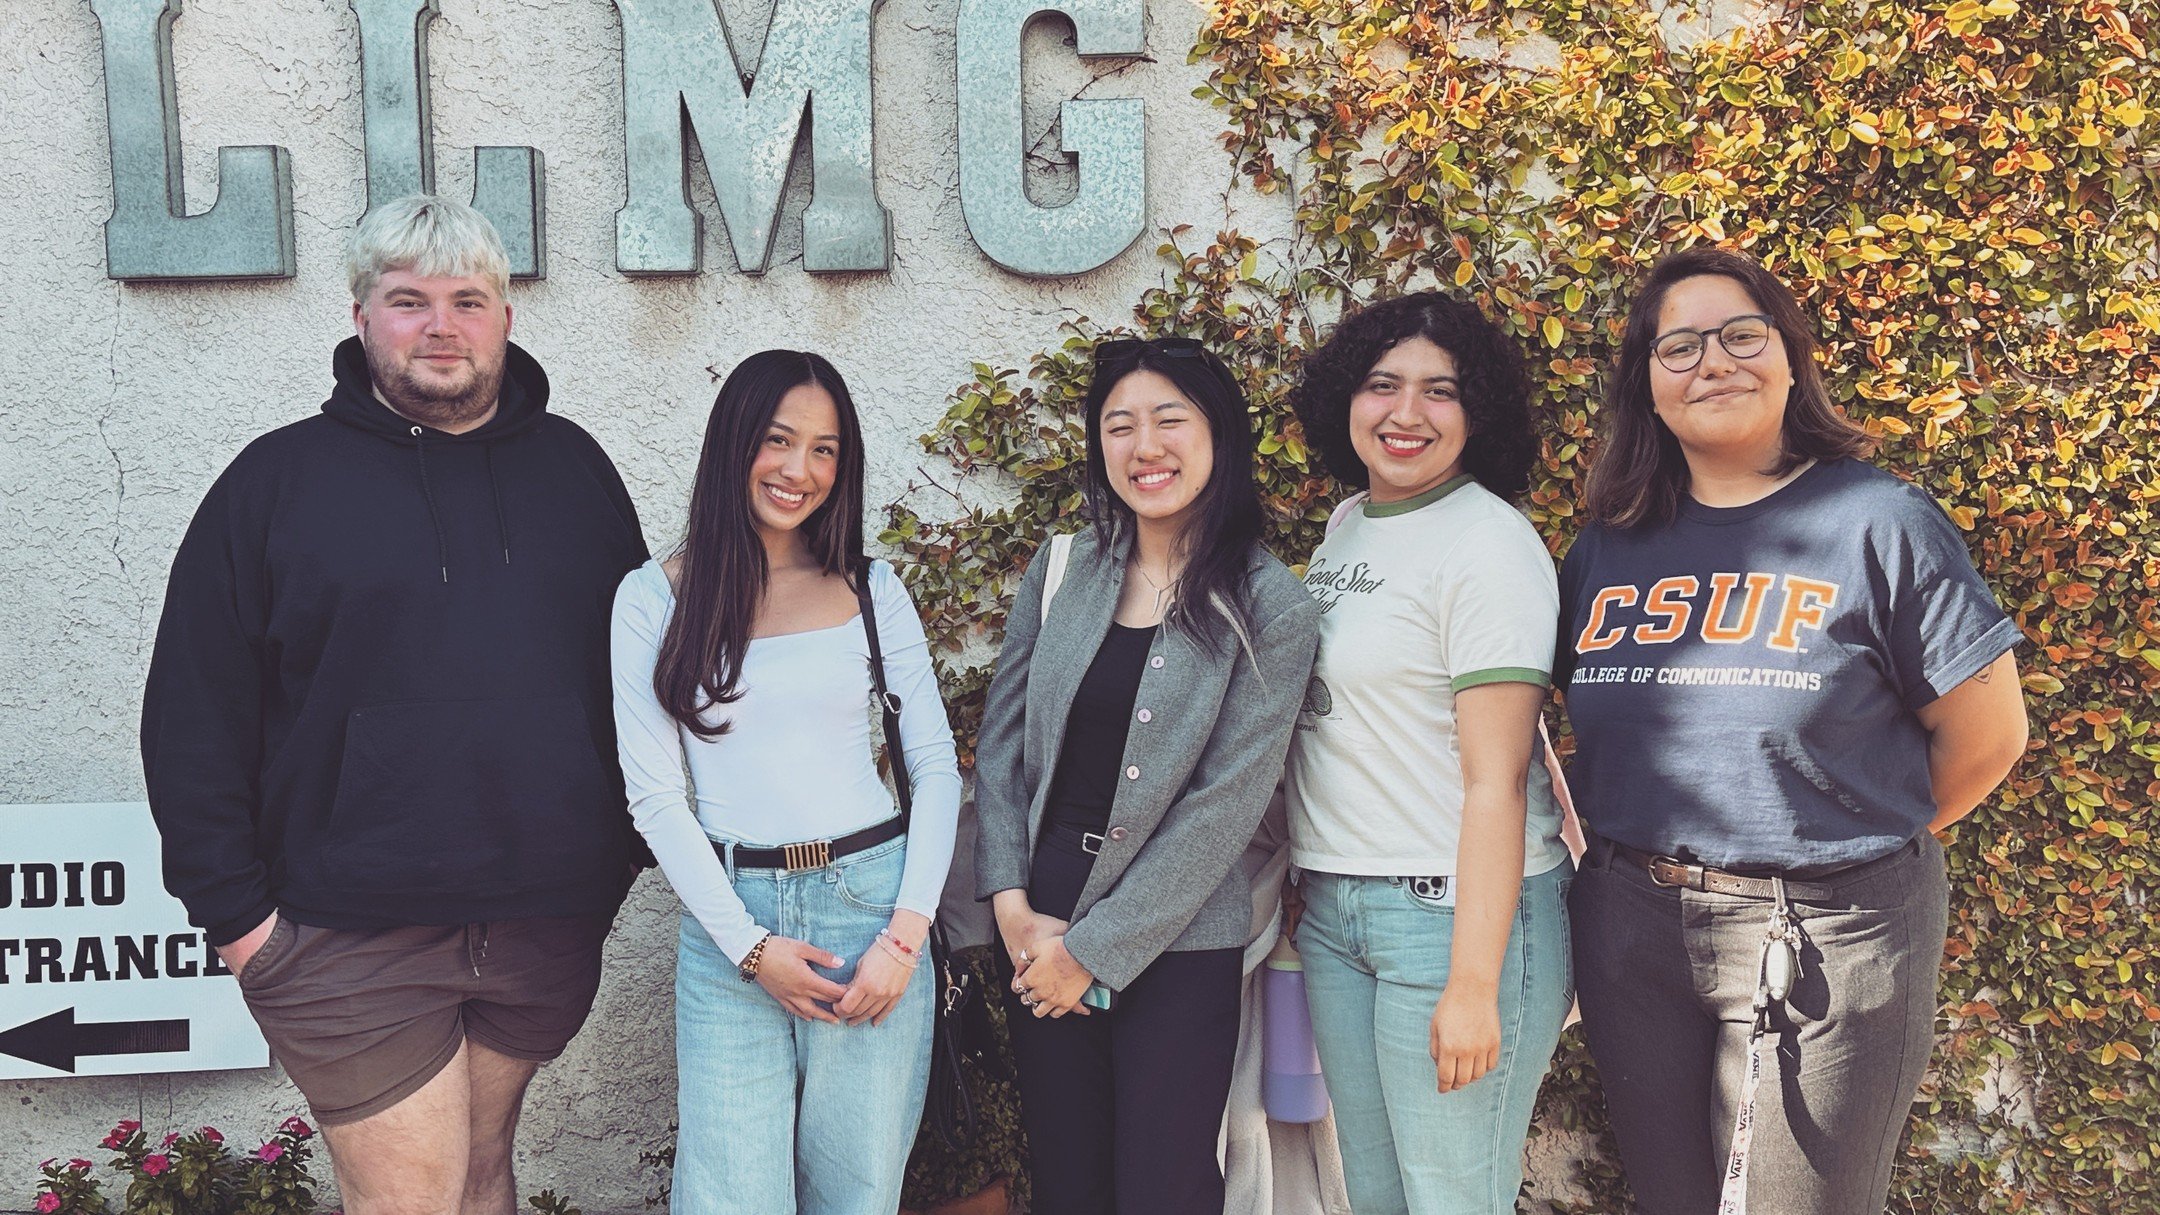 We want to give a quick shoutout to the amazing students and PR team at Cal State Fullerton @csufofficial for helping Love + Laughter grow, create and rebrand over the past 6 months. We are so appreciative of all your hard work, creativity and contri